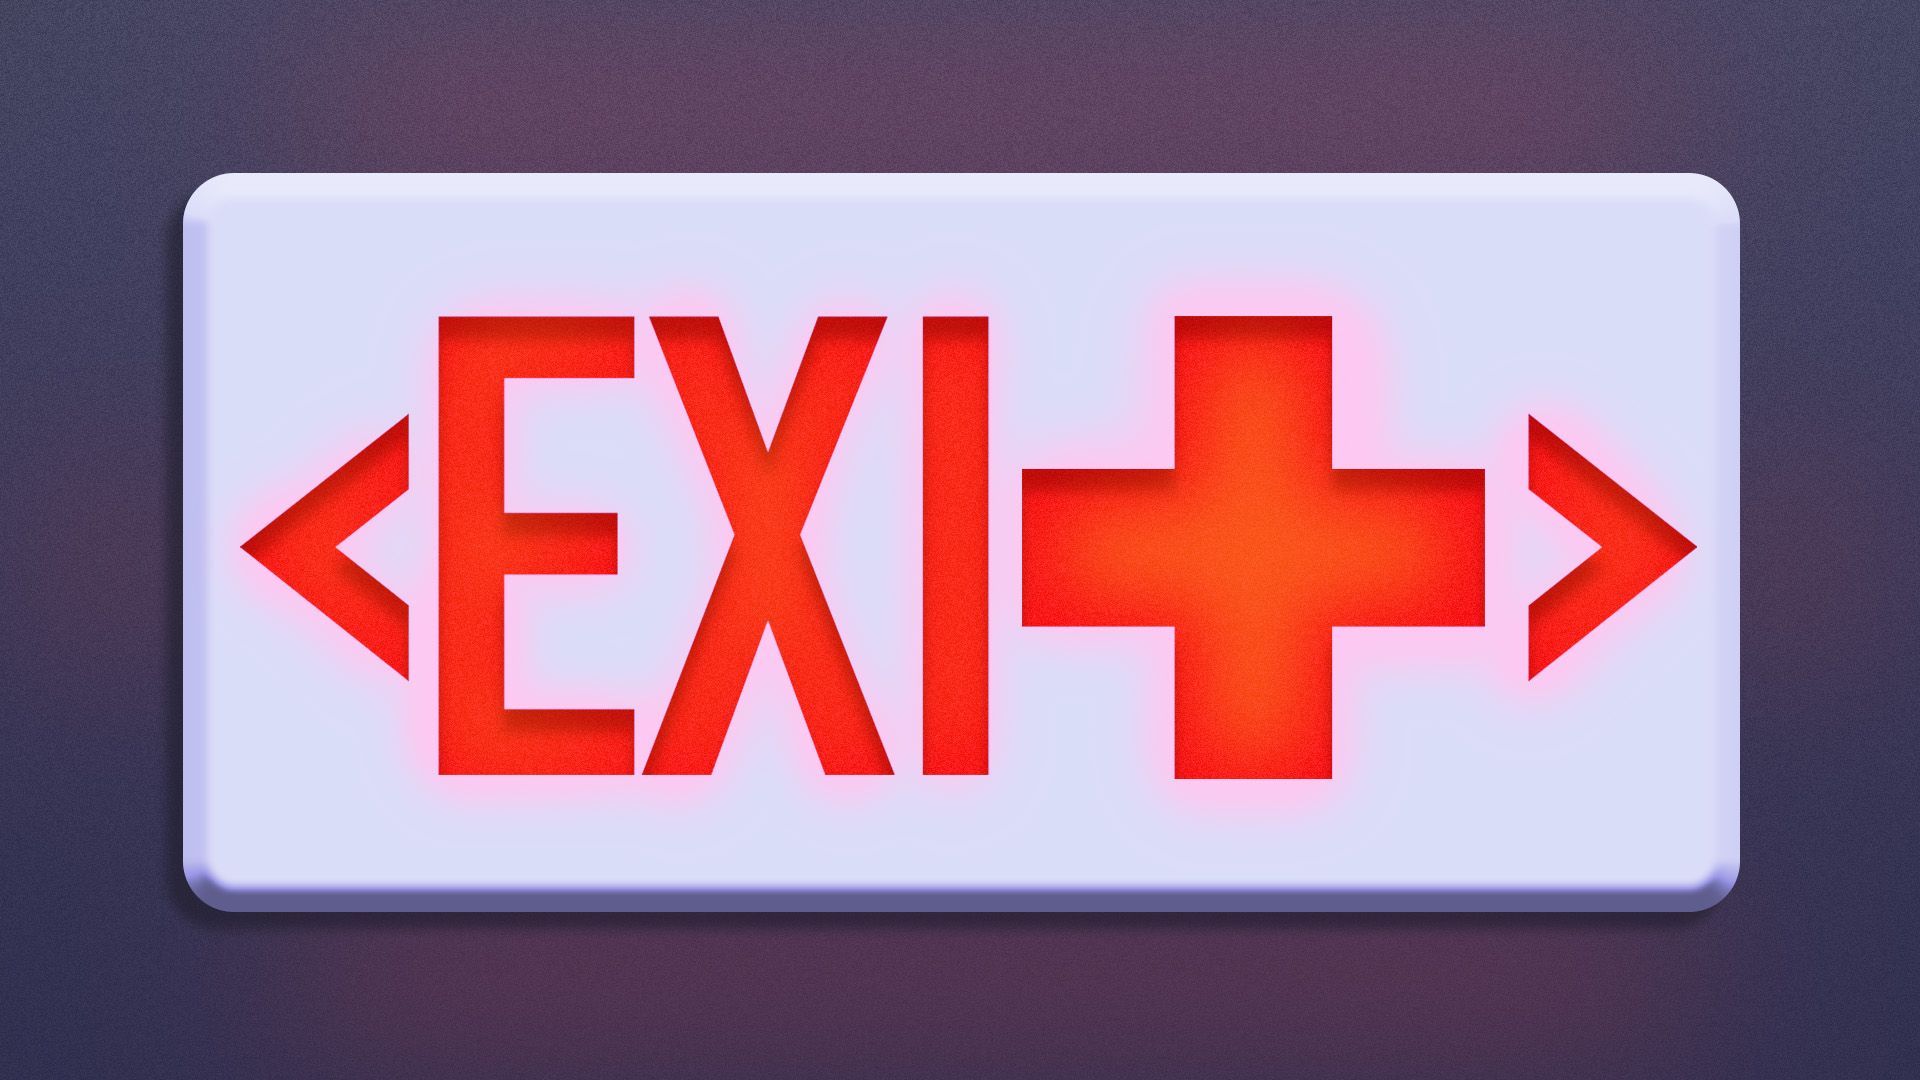 Illustration of an exit sign with a red cross replacing the "t"